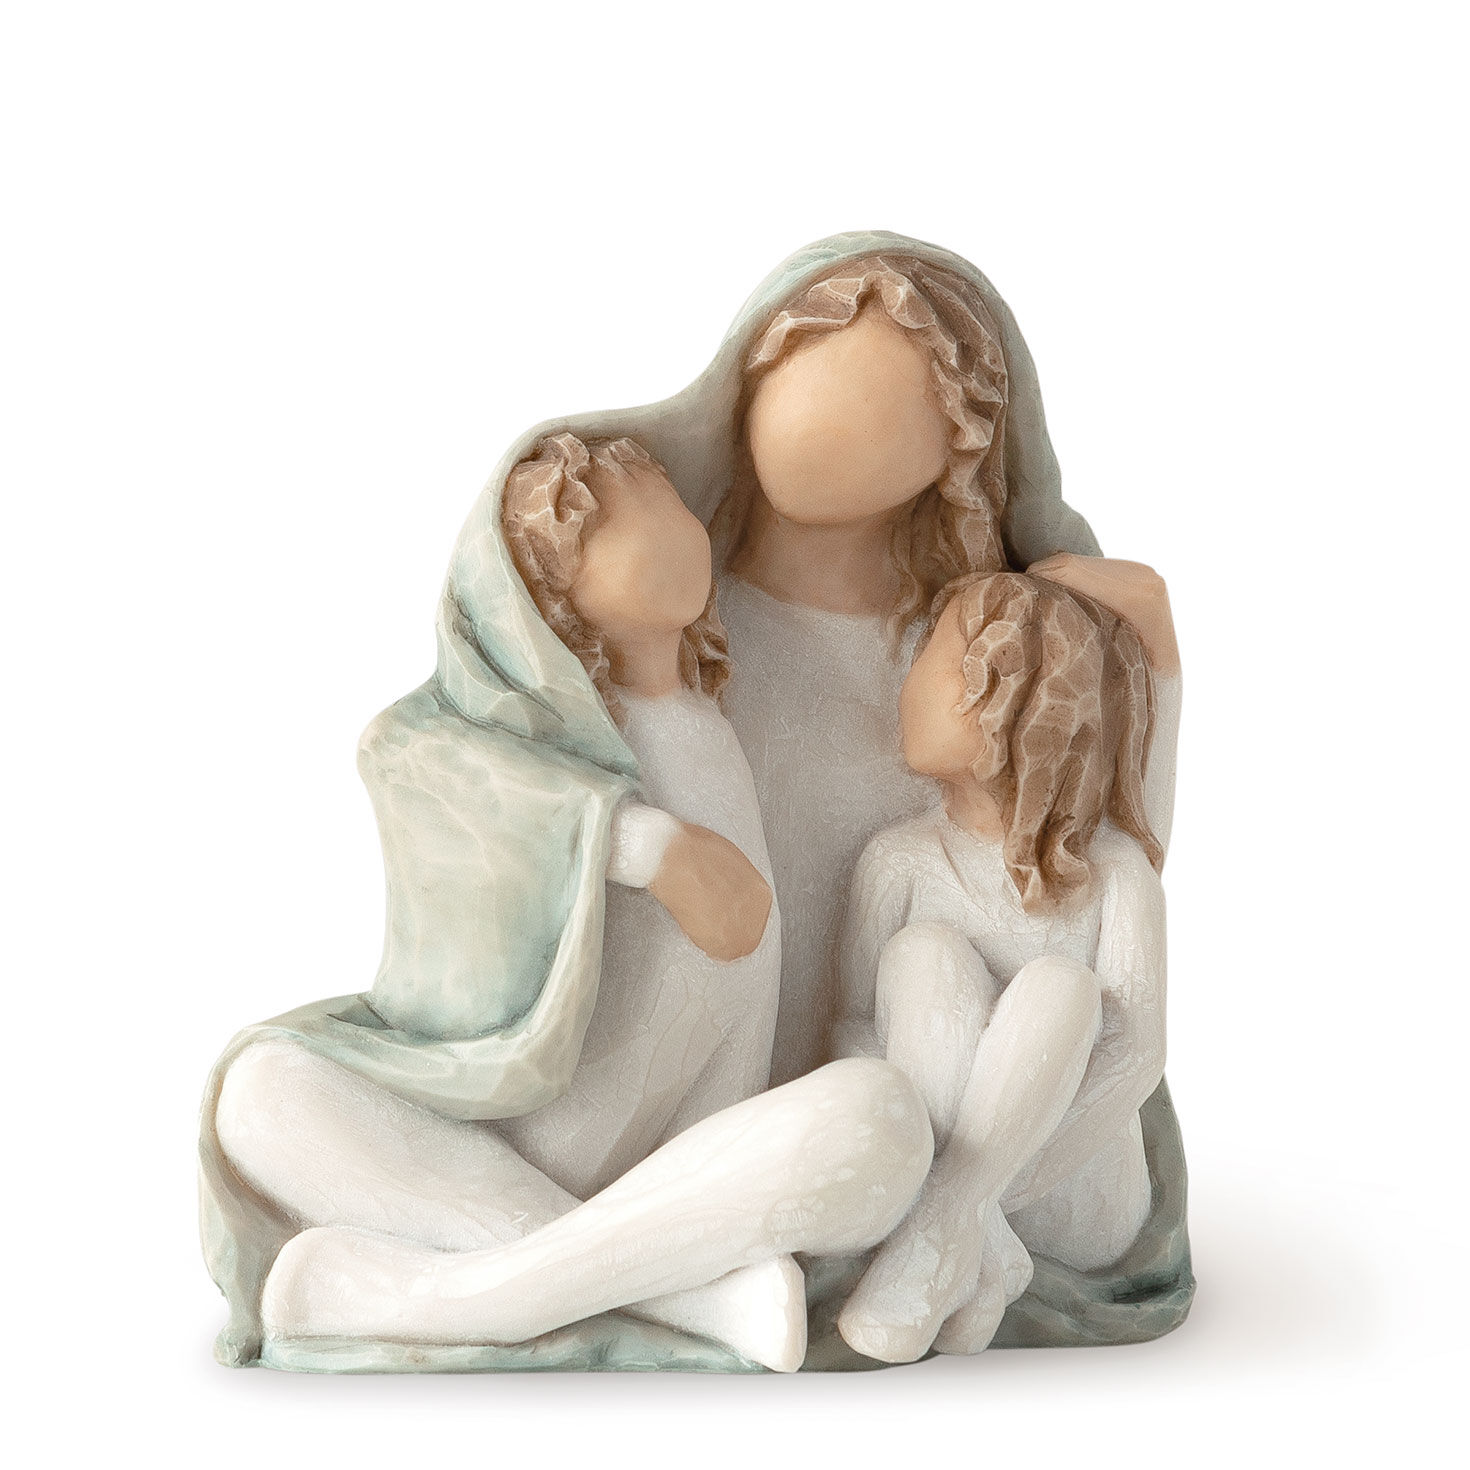 Willow Tree Warm Embrace By My Side Sculpted Hand-Painted Figure Resin Desktop Ornament Home Decorative Statue Gift for Friends Sisters Three Good Sisters Remembrance Angel Willow Tree Figurines 